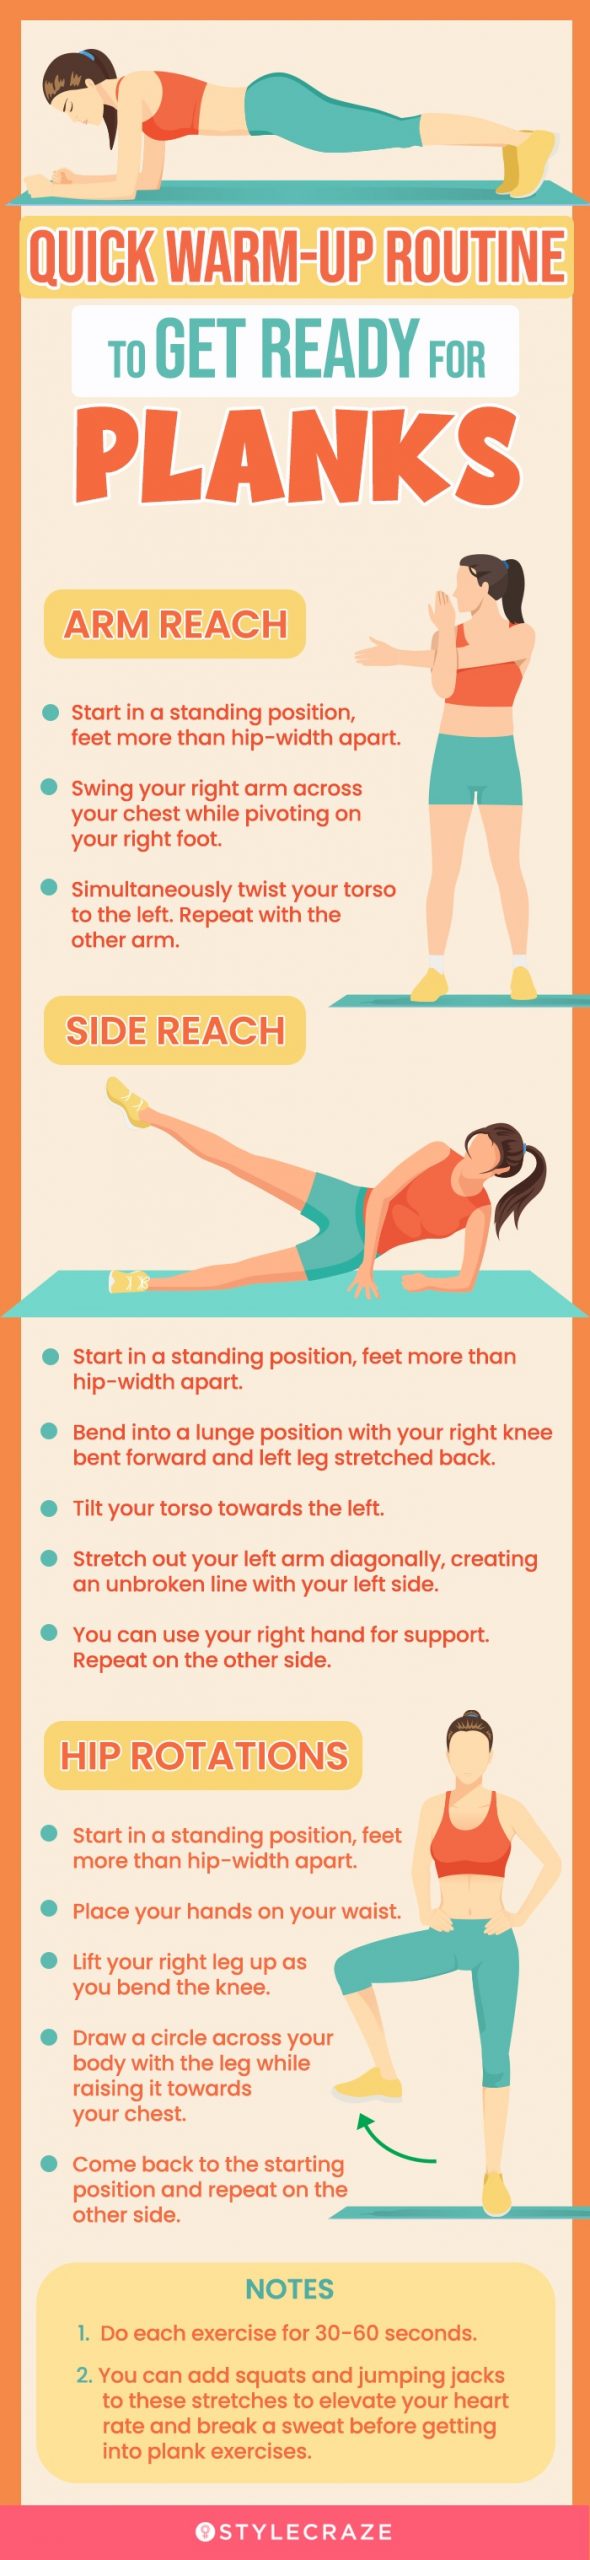 quick warm up routine to get ready for planks [infographic]